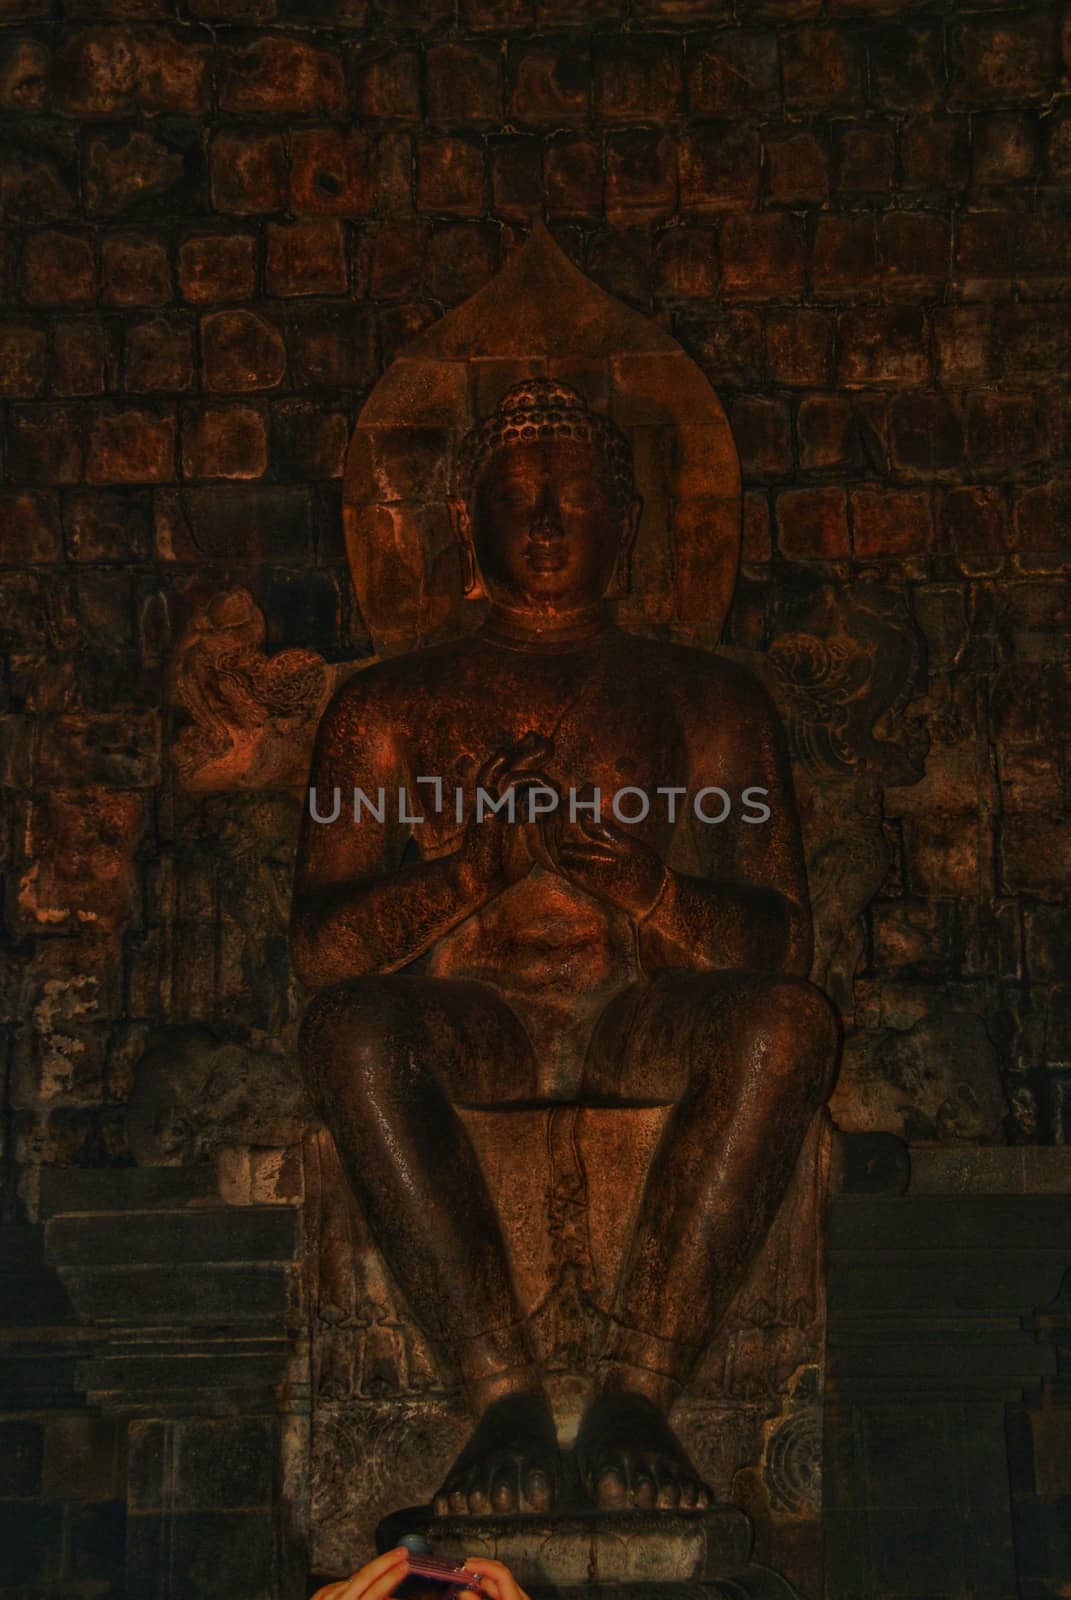 Inside the historical complex of Mendut Temple in Indonesia